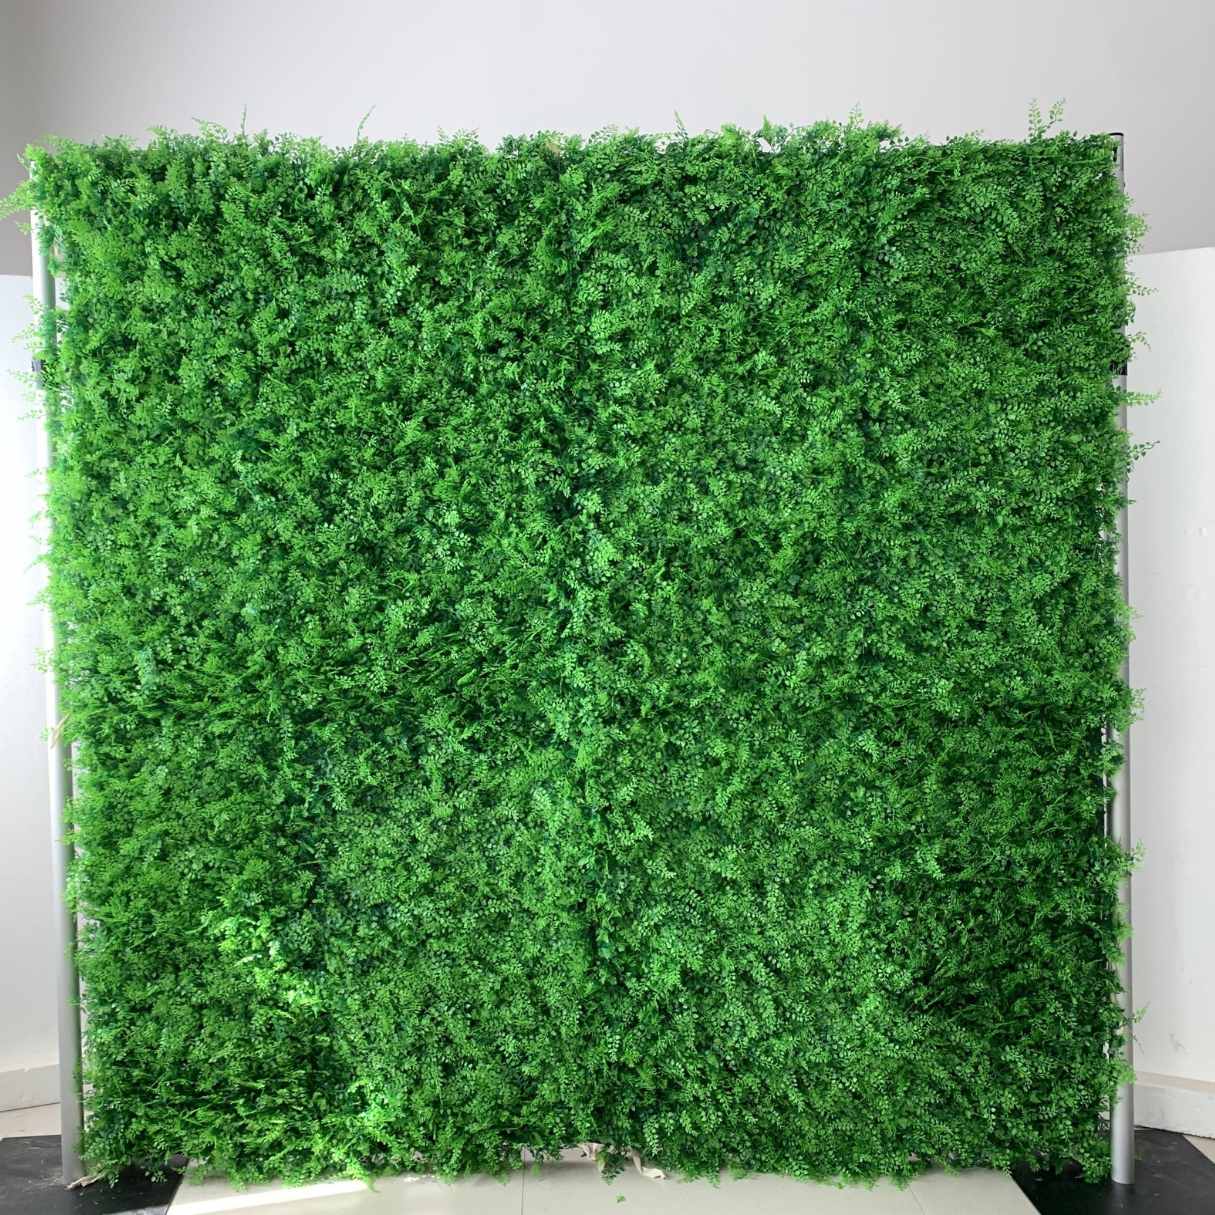 How To Hang Grass Wall